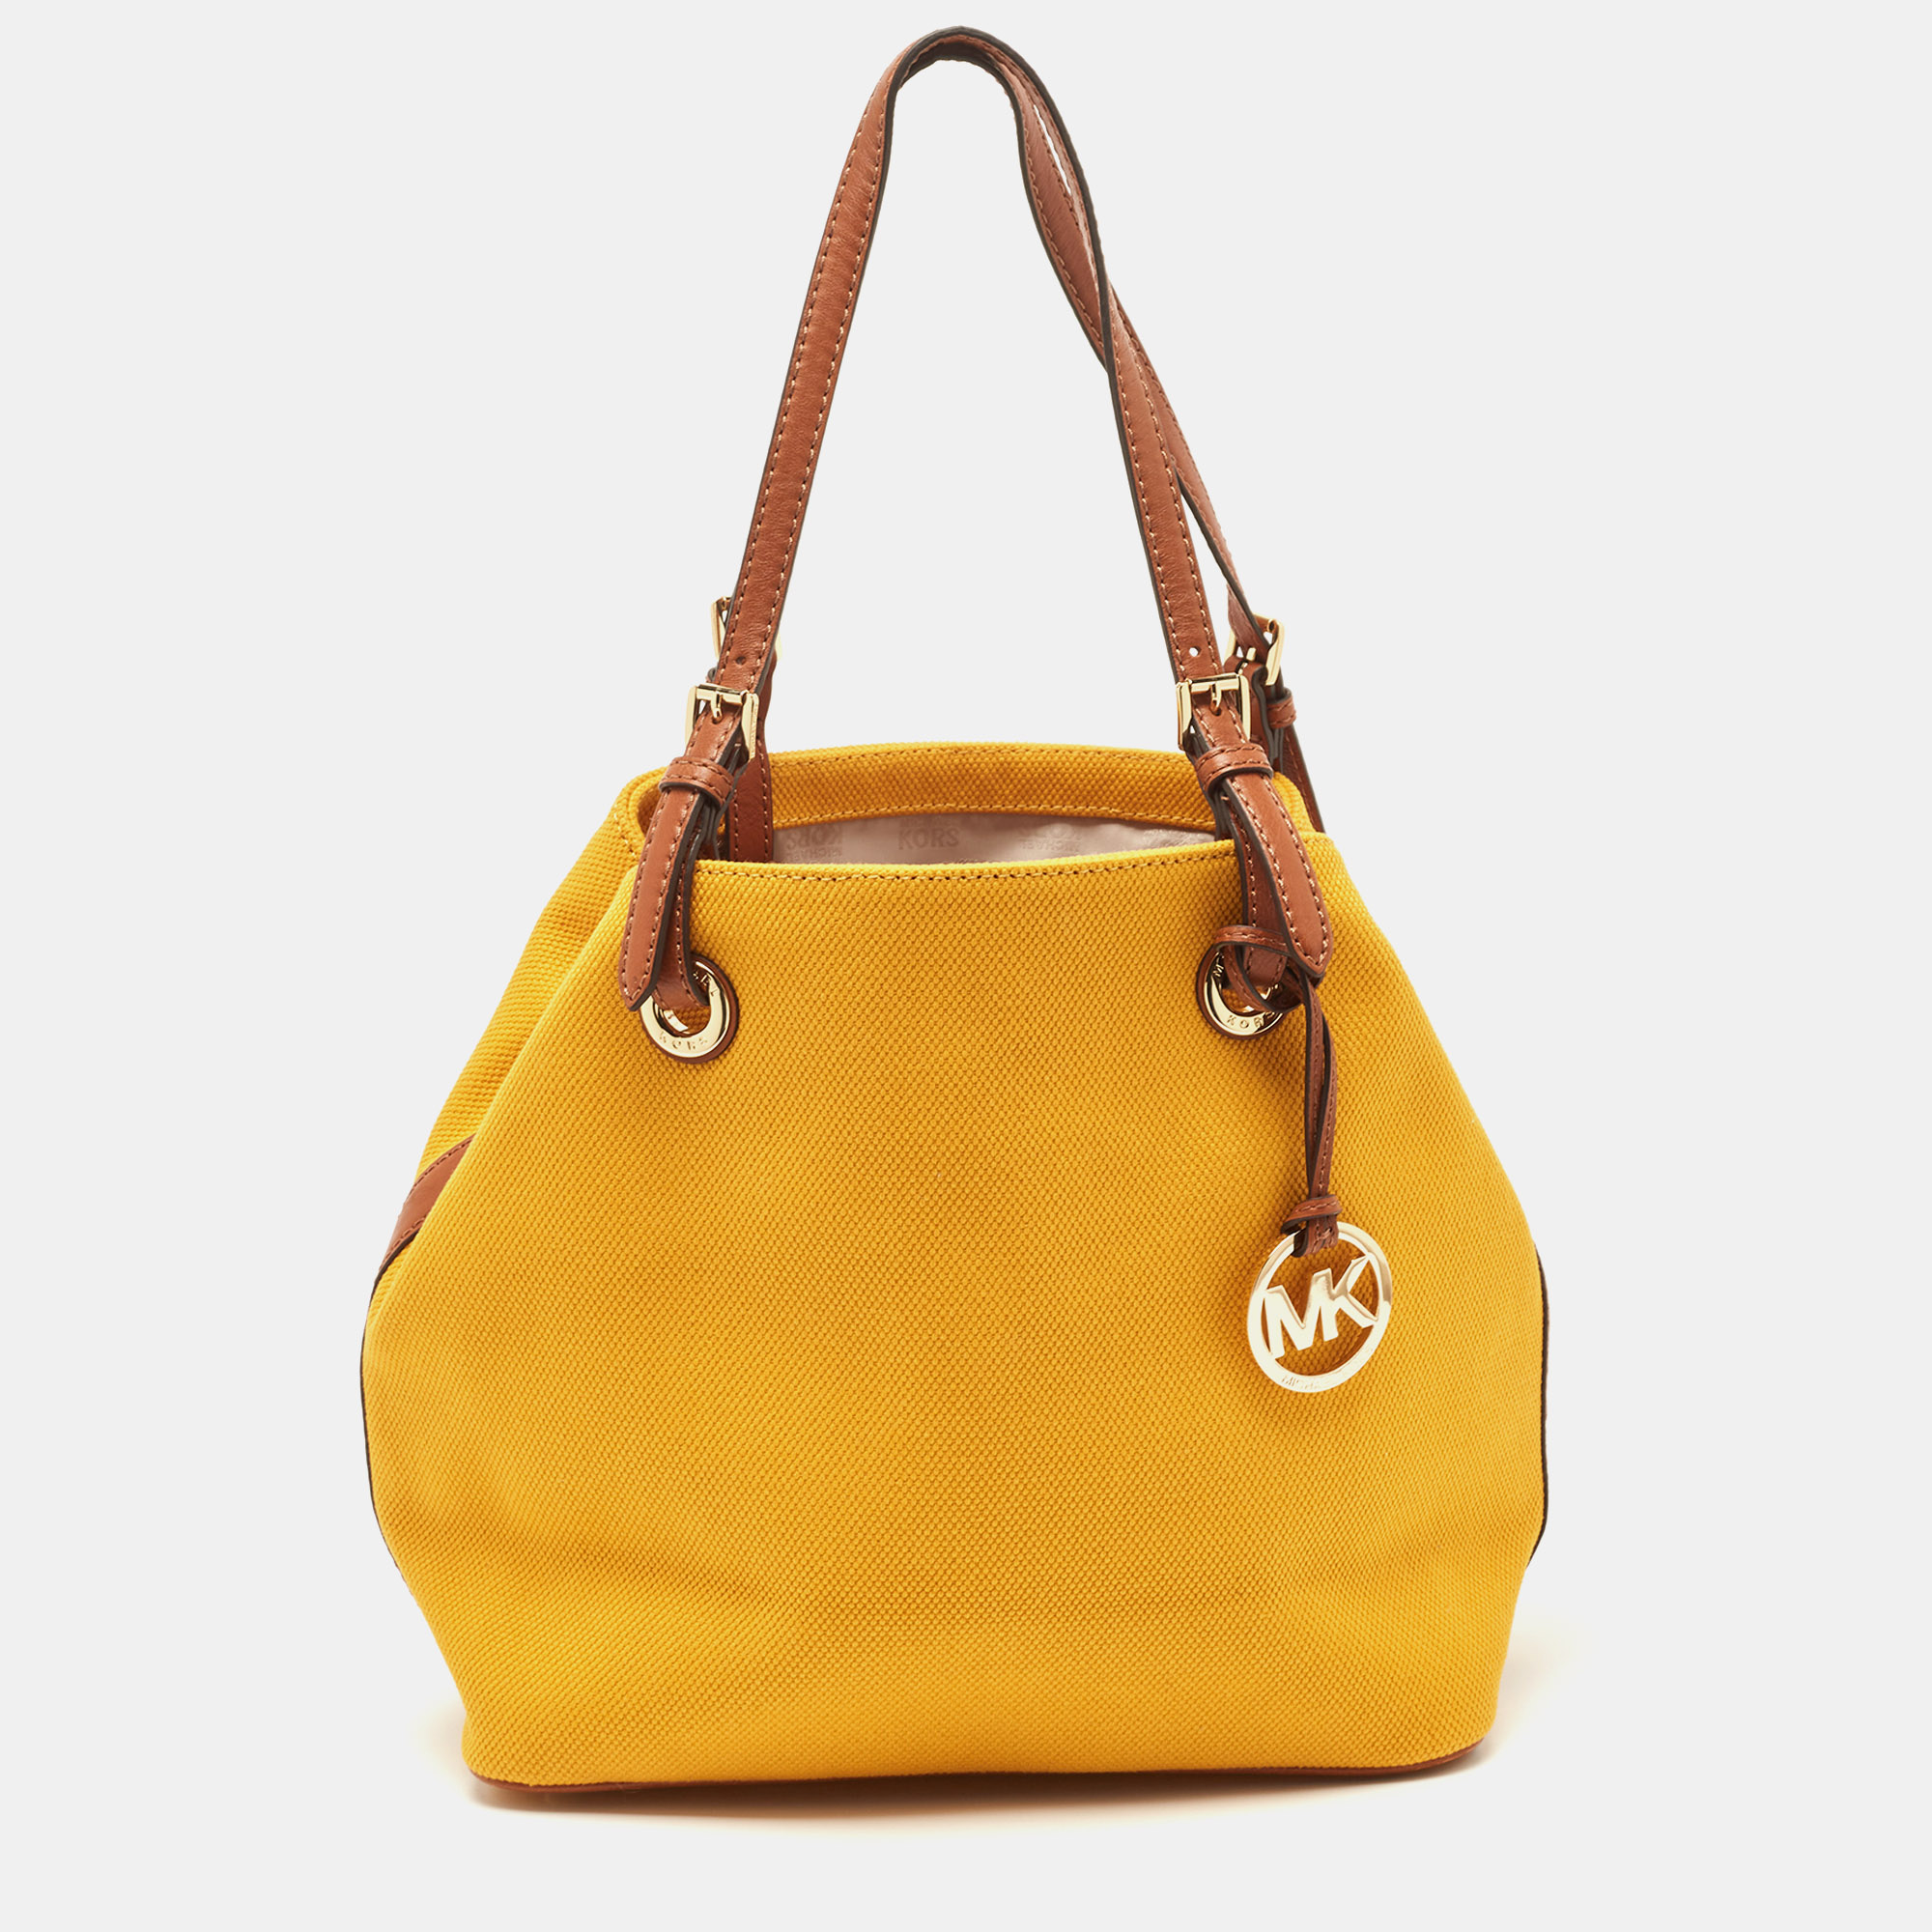 Pre-owned Michael Kors Mustard Yellow Canvas Grab Tote